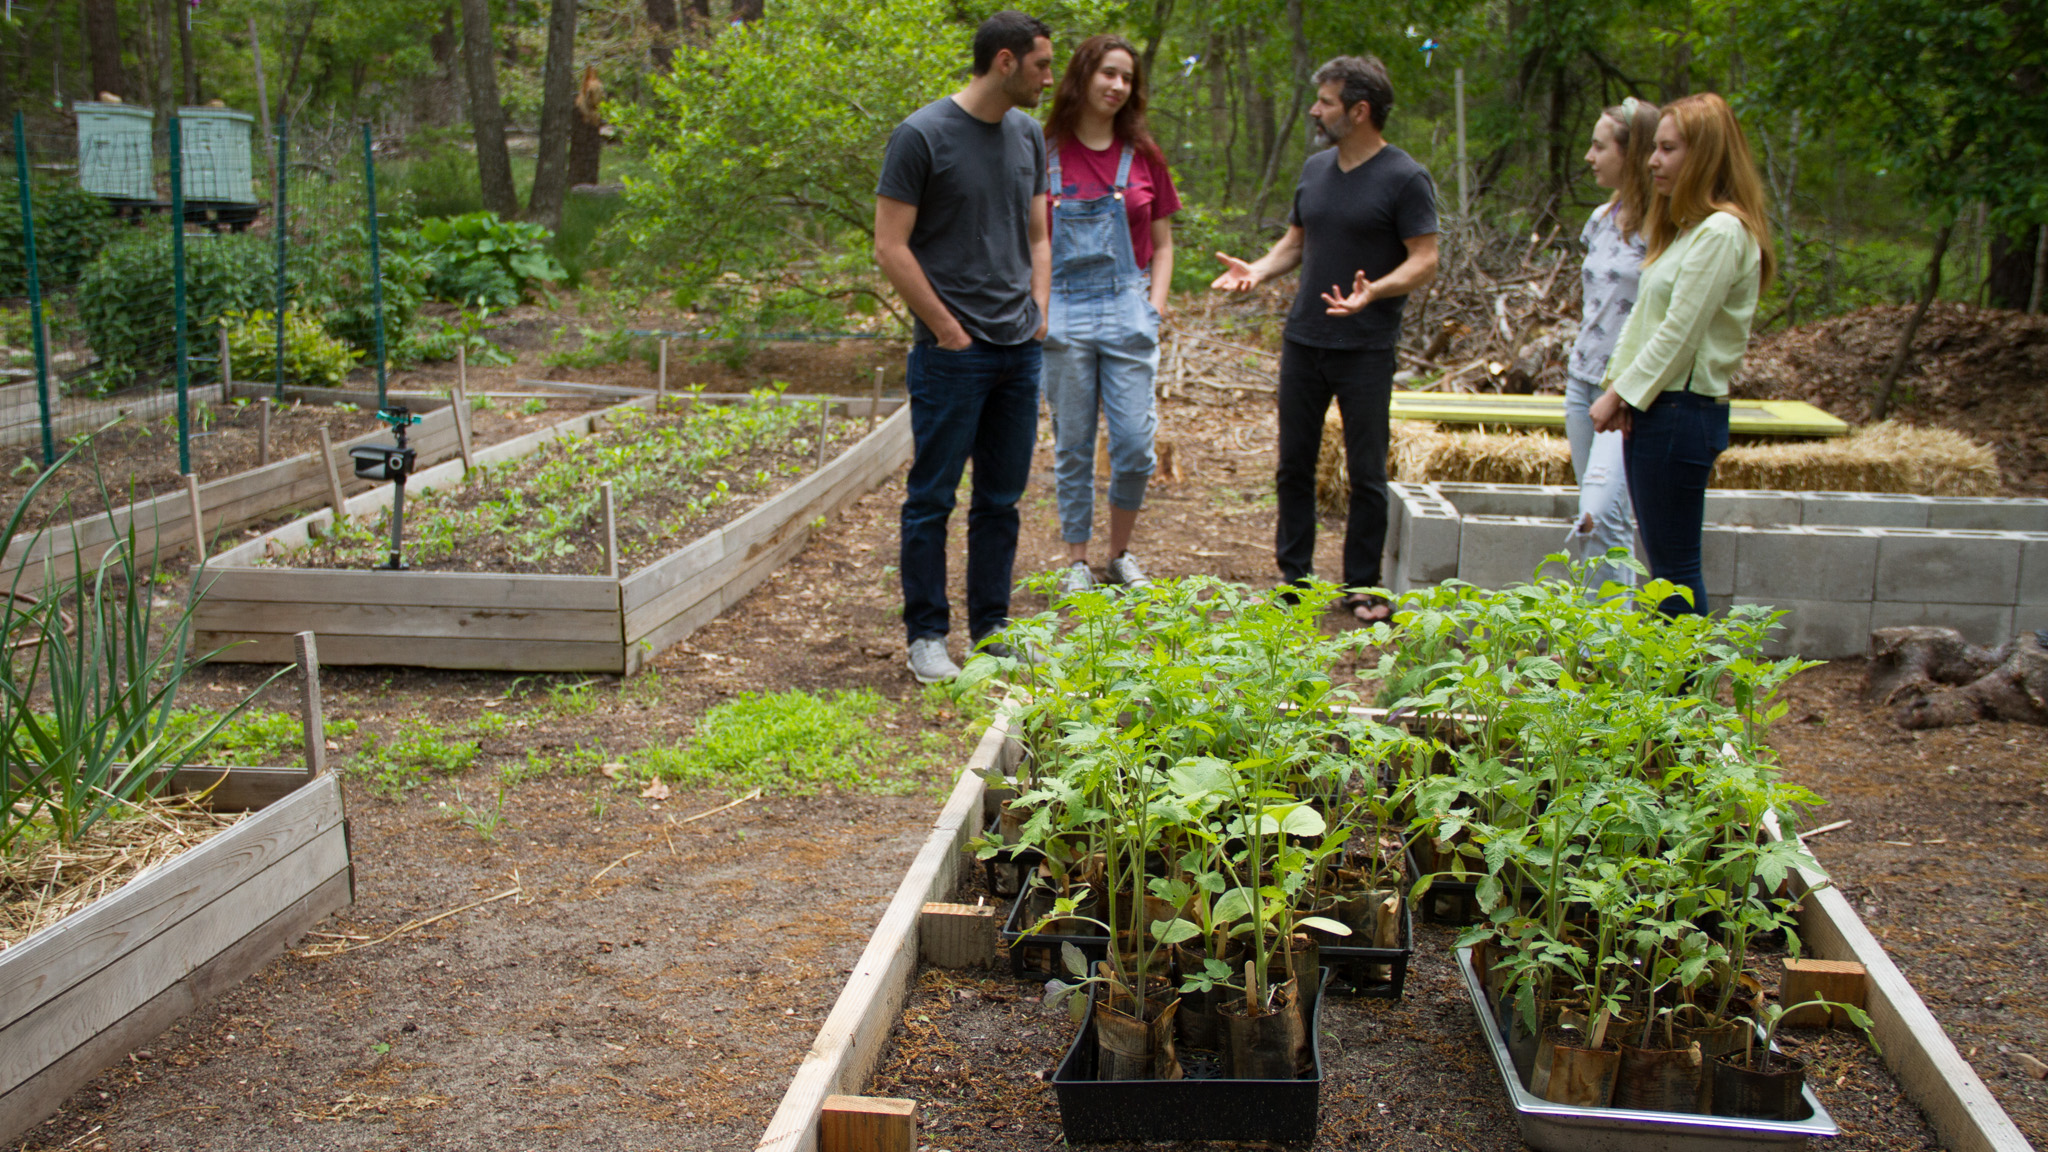 The ECI Teaching Garden at Sweet Woodland Farms